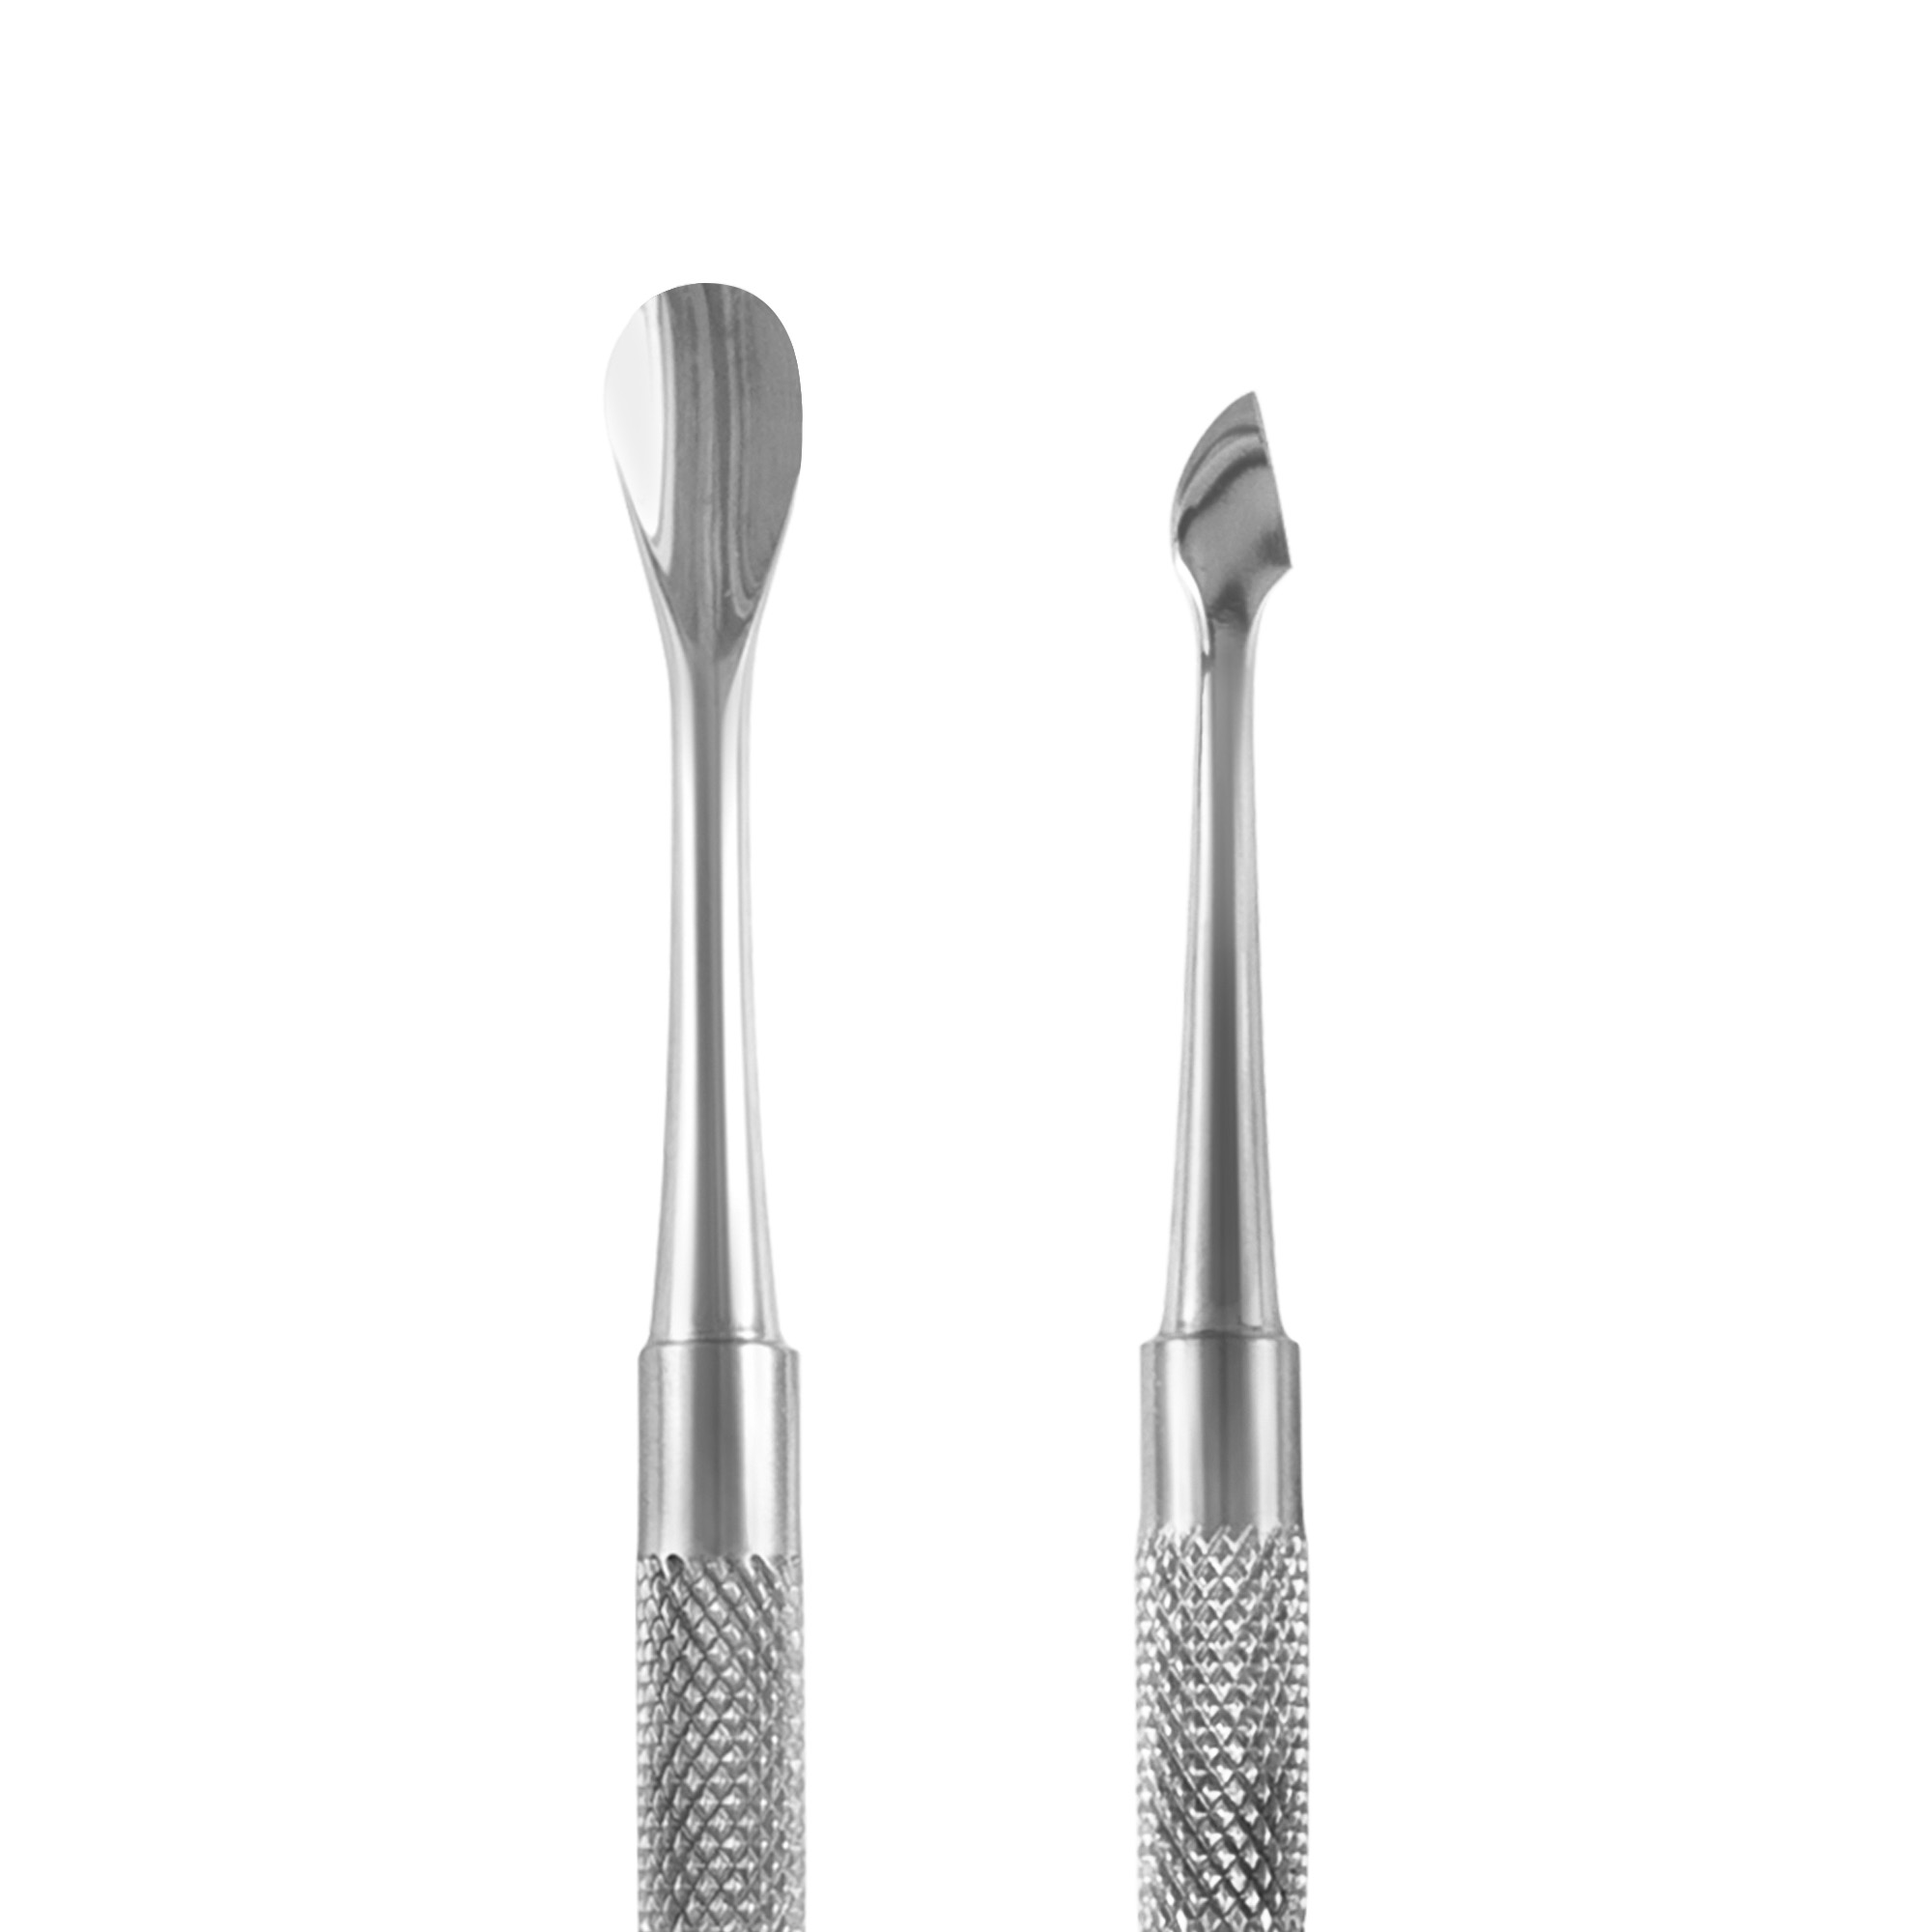 Professional stainless steel cuticle pusher with double concave and lanceolate tip